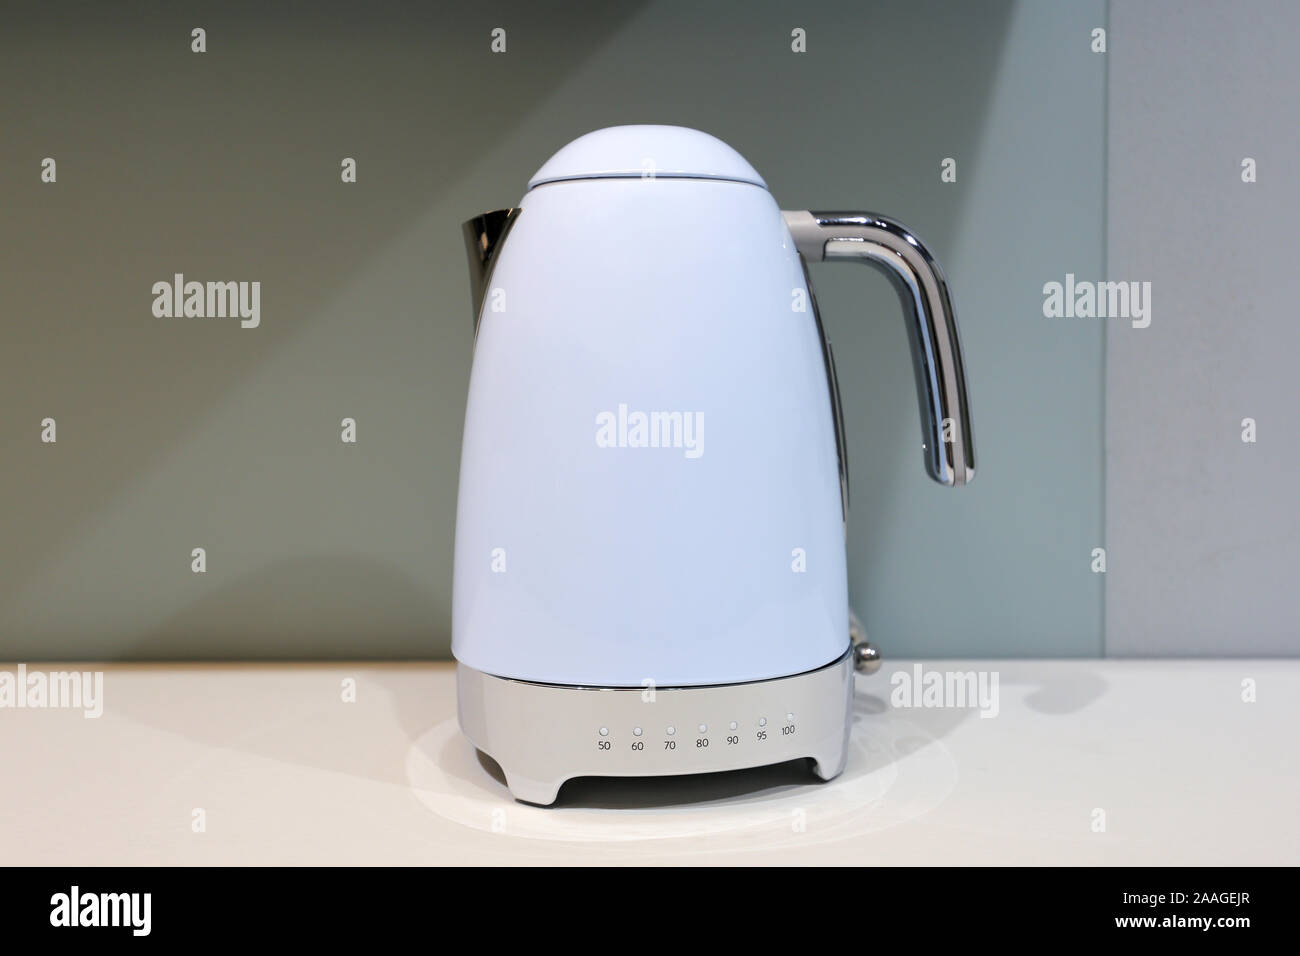 https://c8.alamy.com/comp/2AAGEJR/blue-electric-kettle-on-the-table-2AAGEJR.jpg